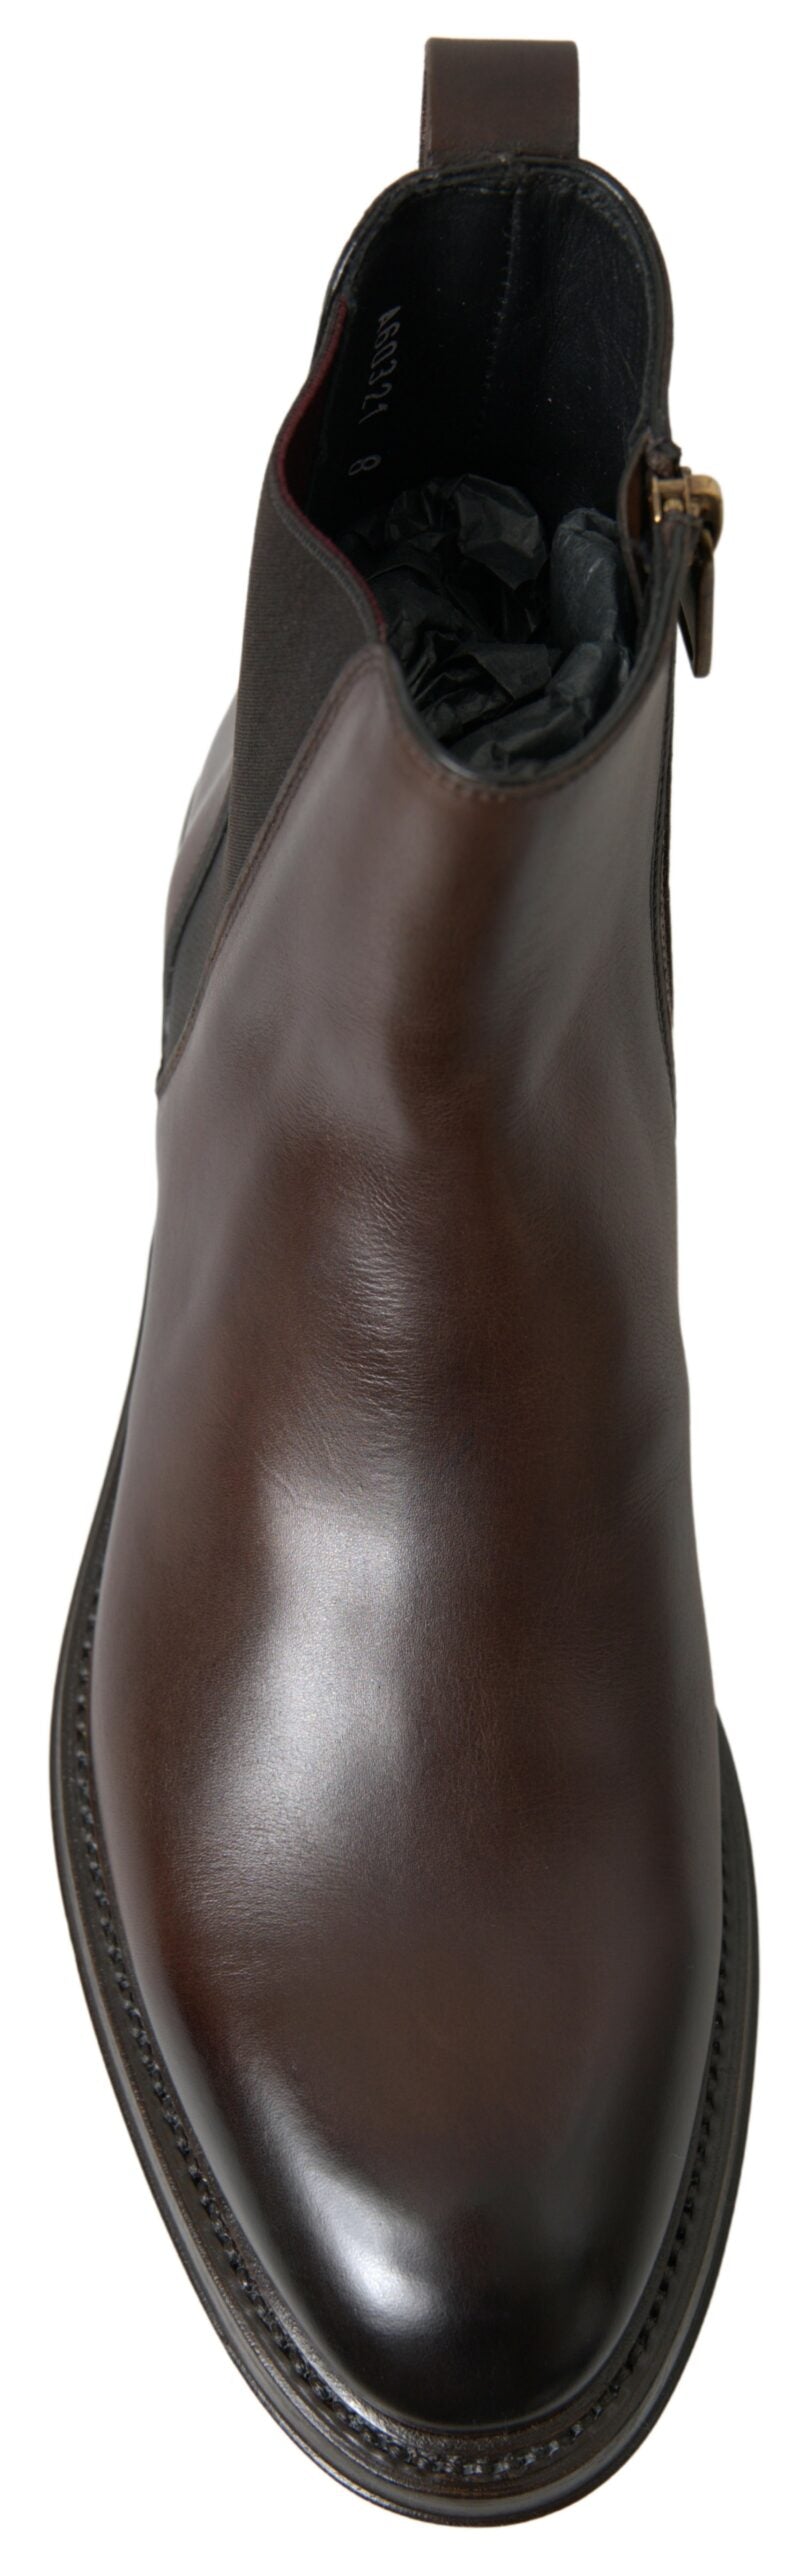 Dolce & Gabbana Brown Leather Chelsea Mens Boots Shoes